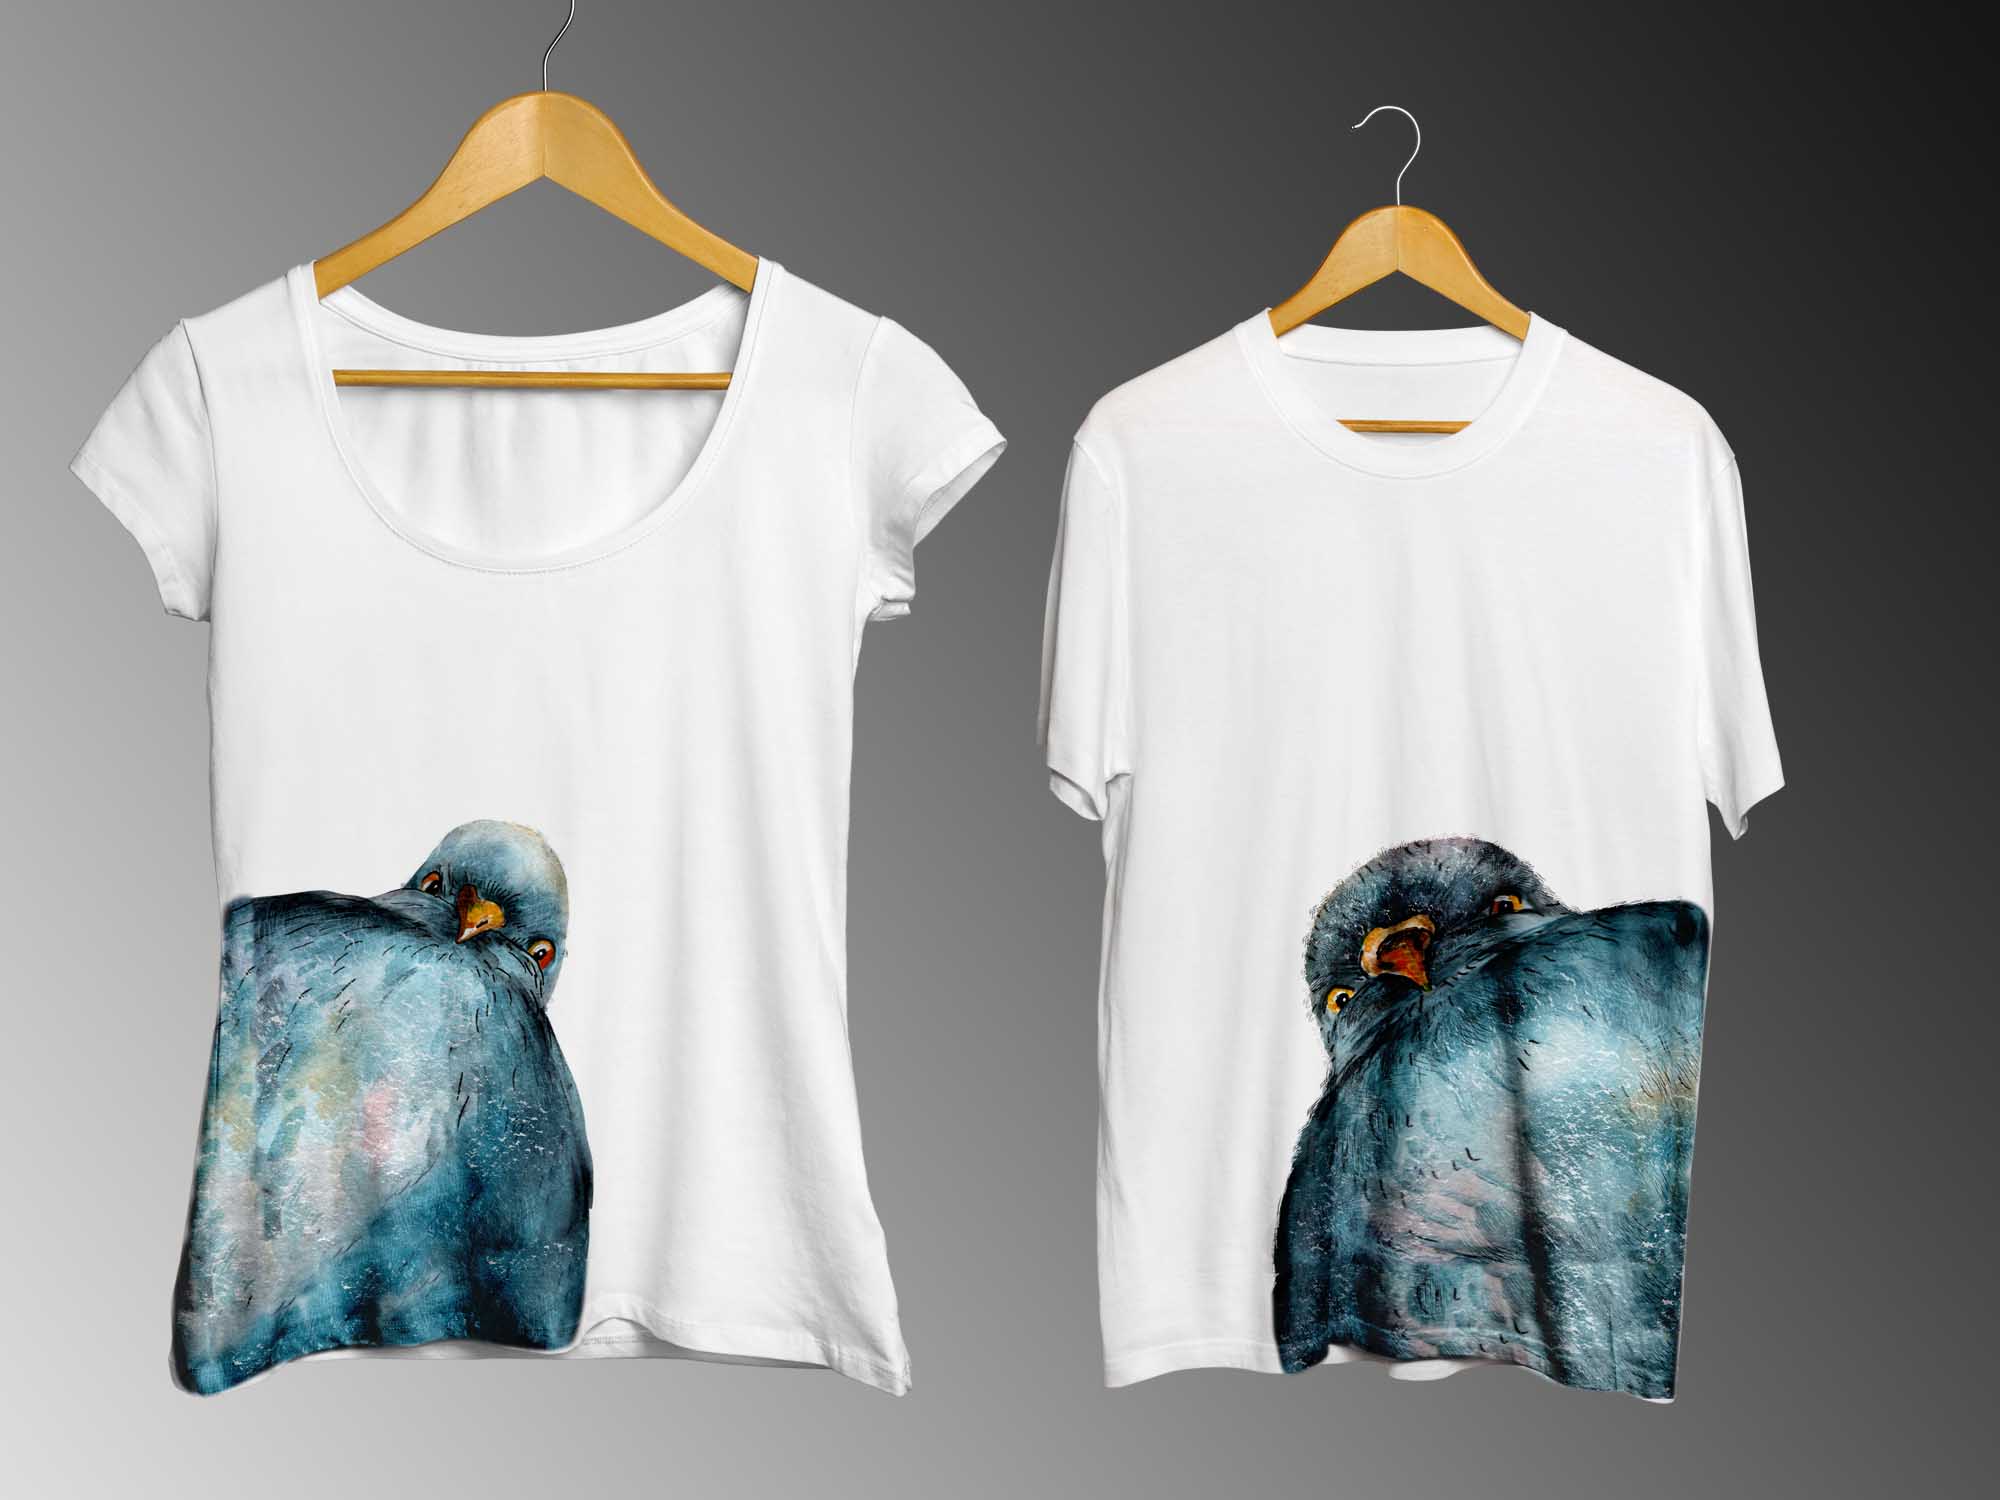 Watercolor Funny Birds on T-shirt.